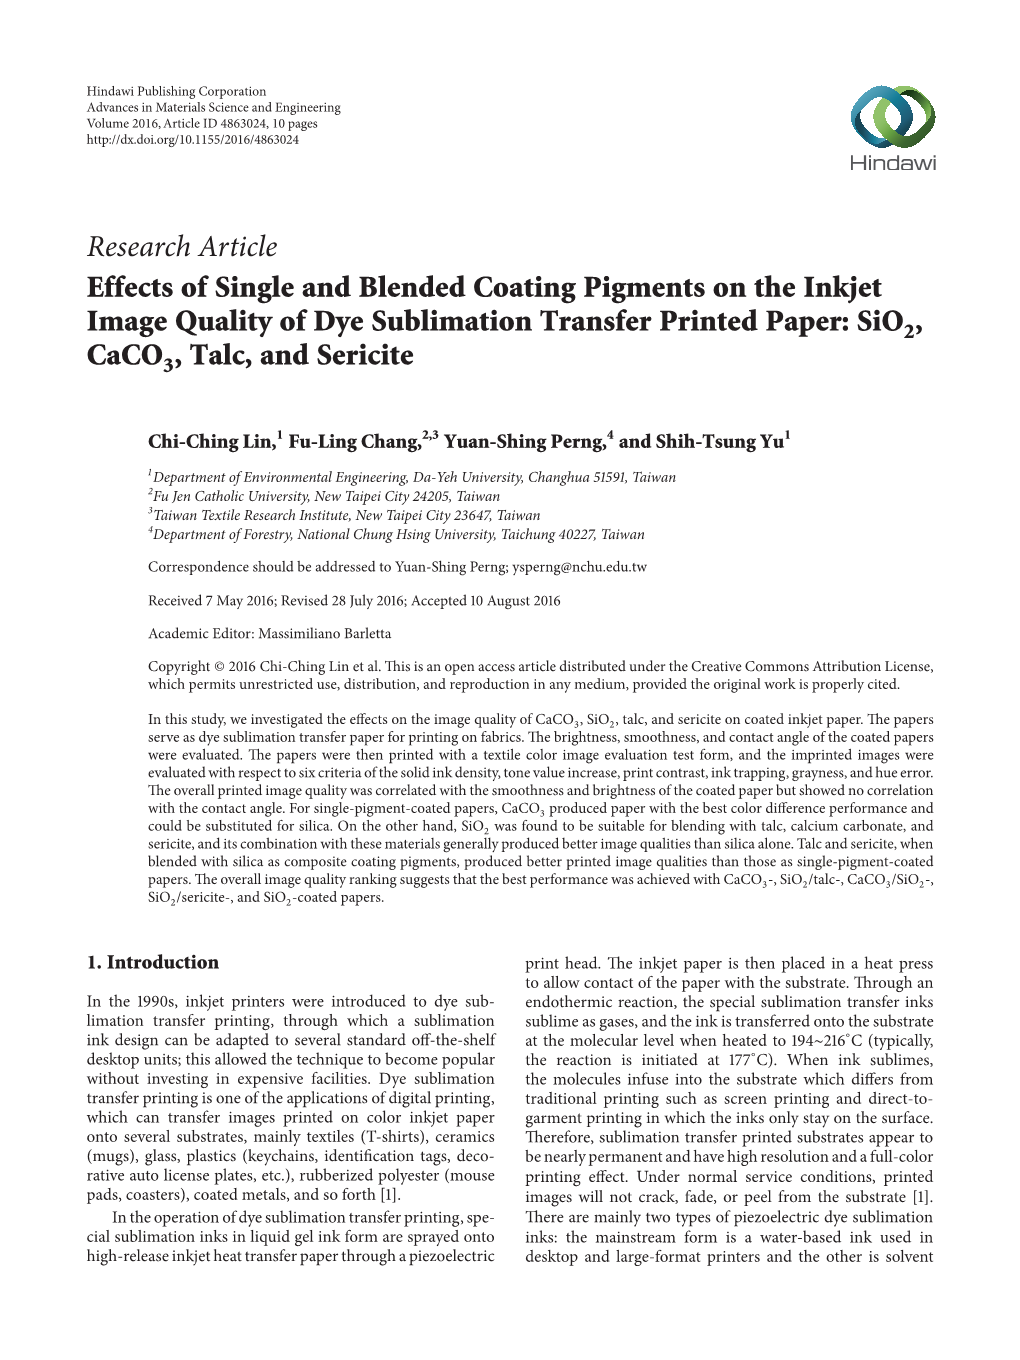 Research Article Effects of Single and Blended Coating Pigments on the Inkjet Image Quality of Dye Sublimation Transfer Printed Paper: Sio2, Caco3, Talc, and Sericite